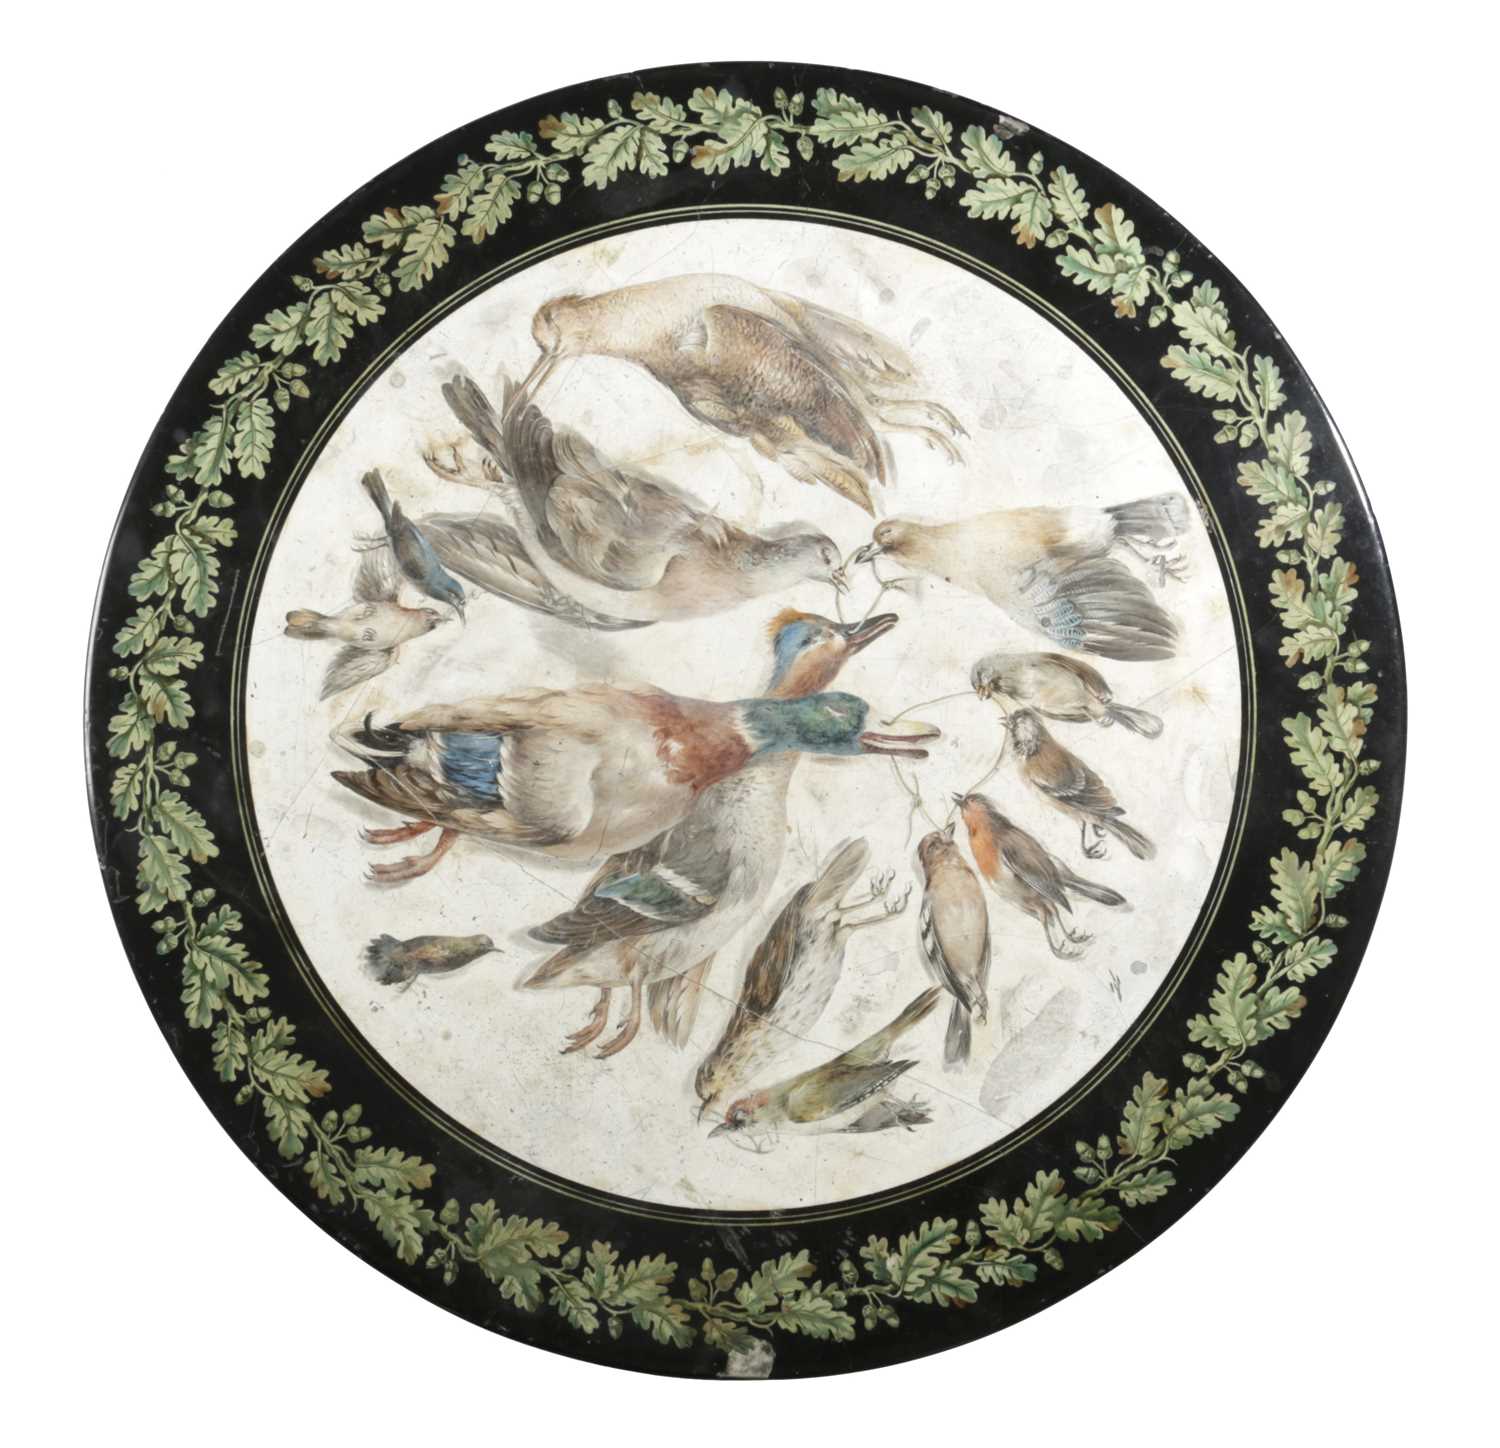 AN ITALIAN SCAGLIOLA TABLE TOP IN THE MANNER OF THE DELLA VALLE BROTHERS, TUSCAN, SECOND QUARTER - Image 2 of 3